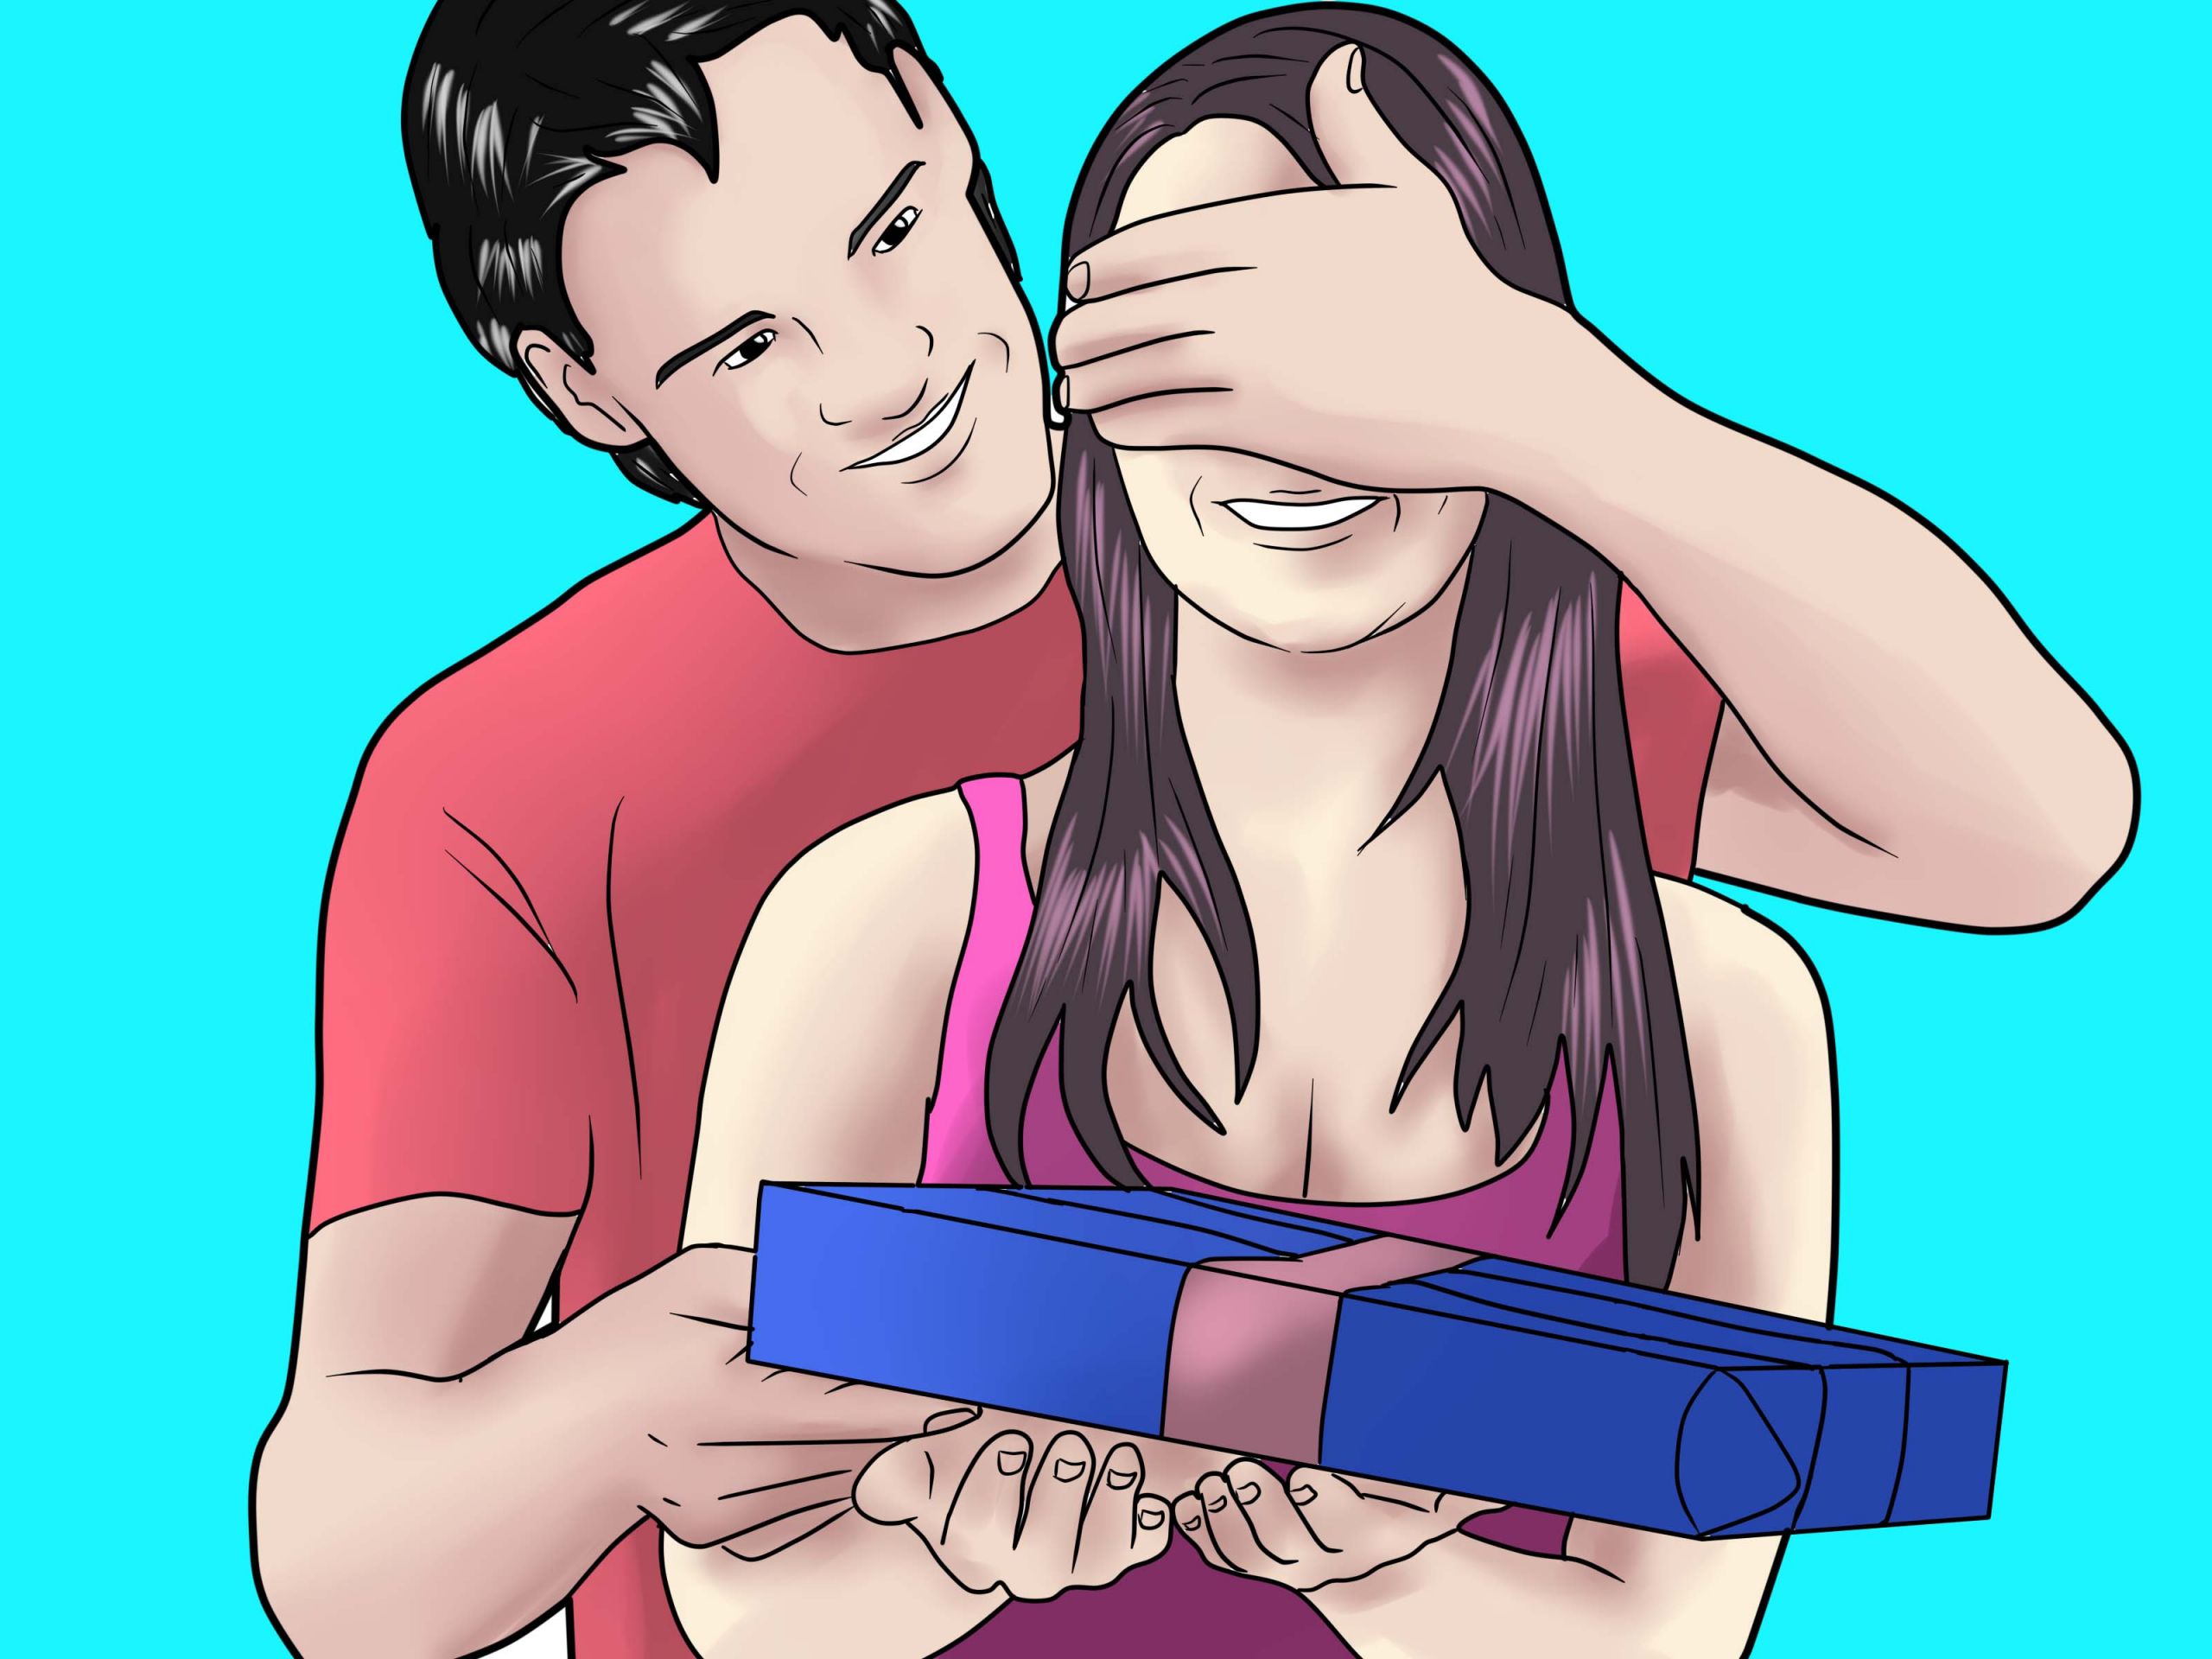 Gift Ideas To Get Your Girlfriend
 How to Get Your Girlfriend a Great Birthday Present with